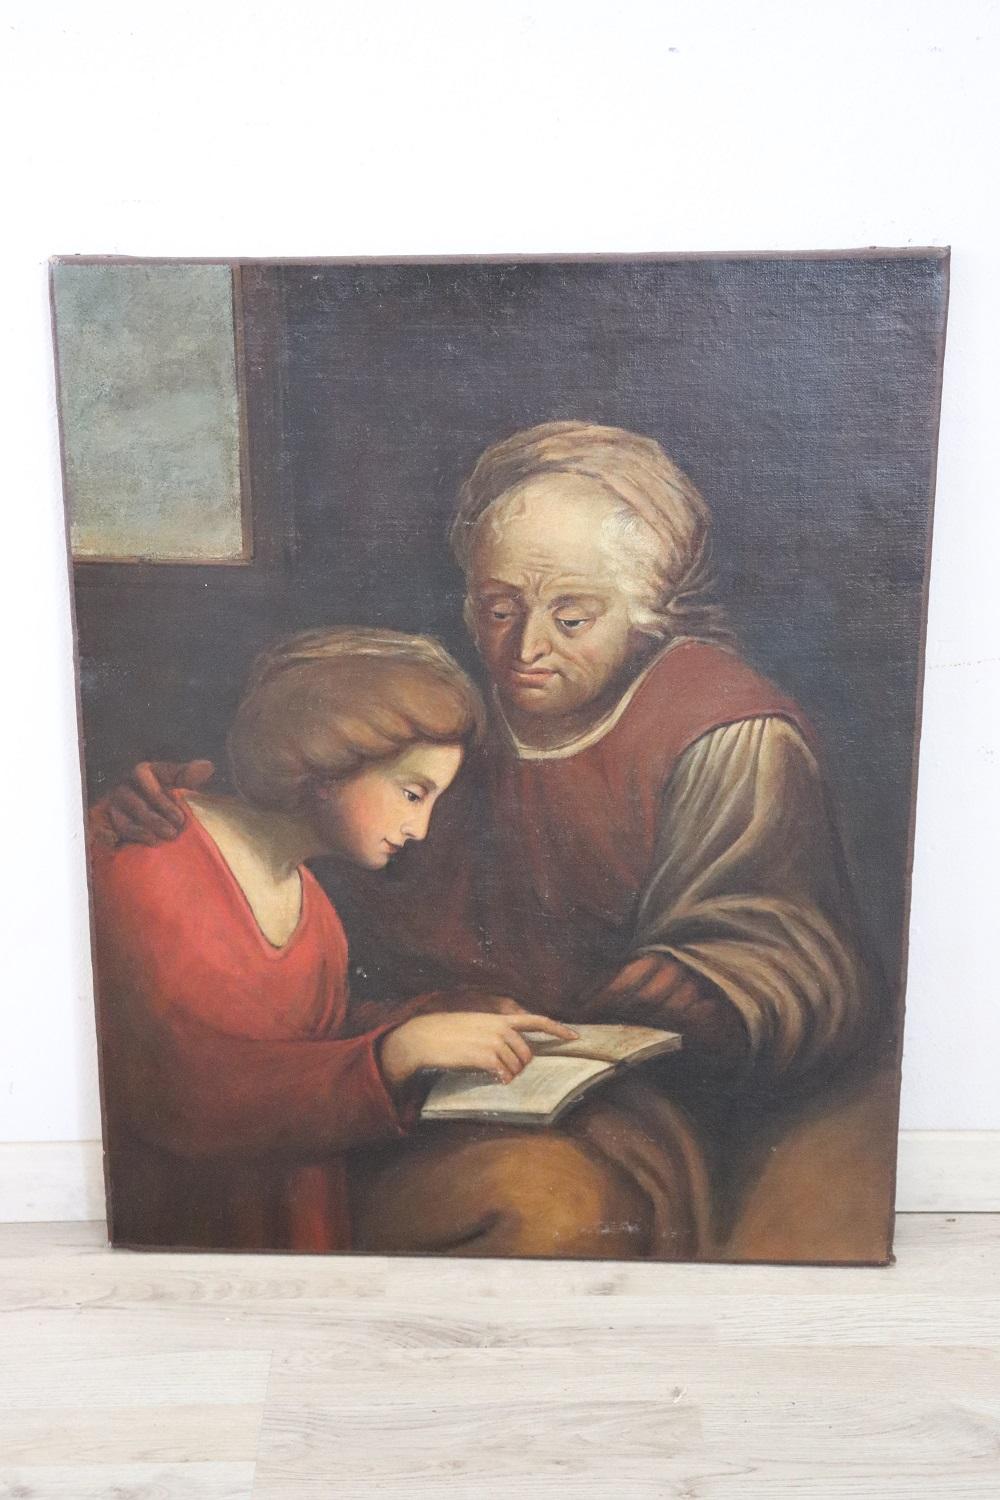 Beautiful antique Italian oil painting on canvas 1850s. Old woman with girl. High artistic quality. Sold unframed.